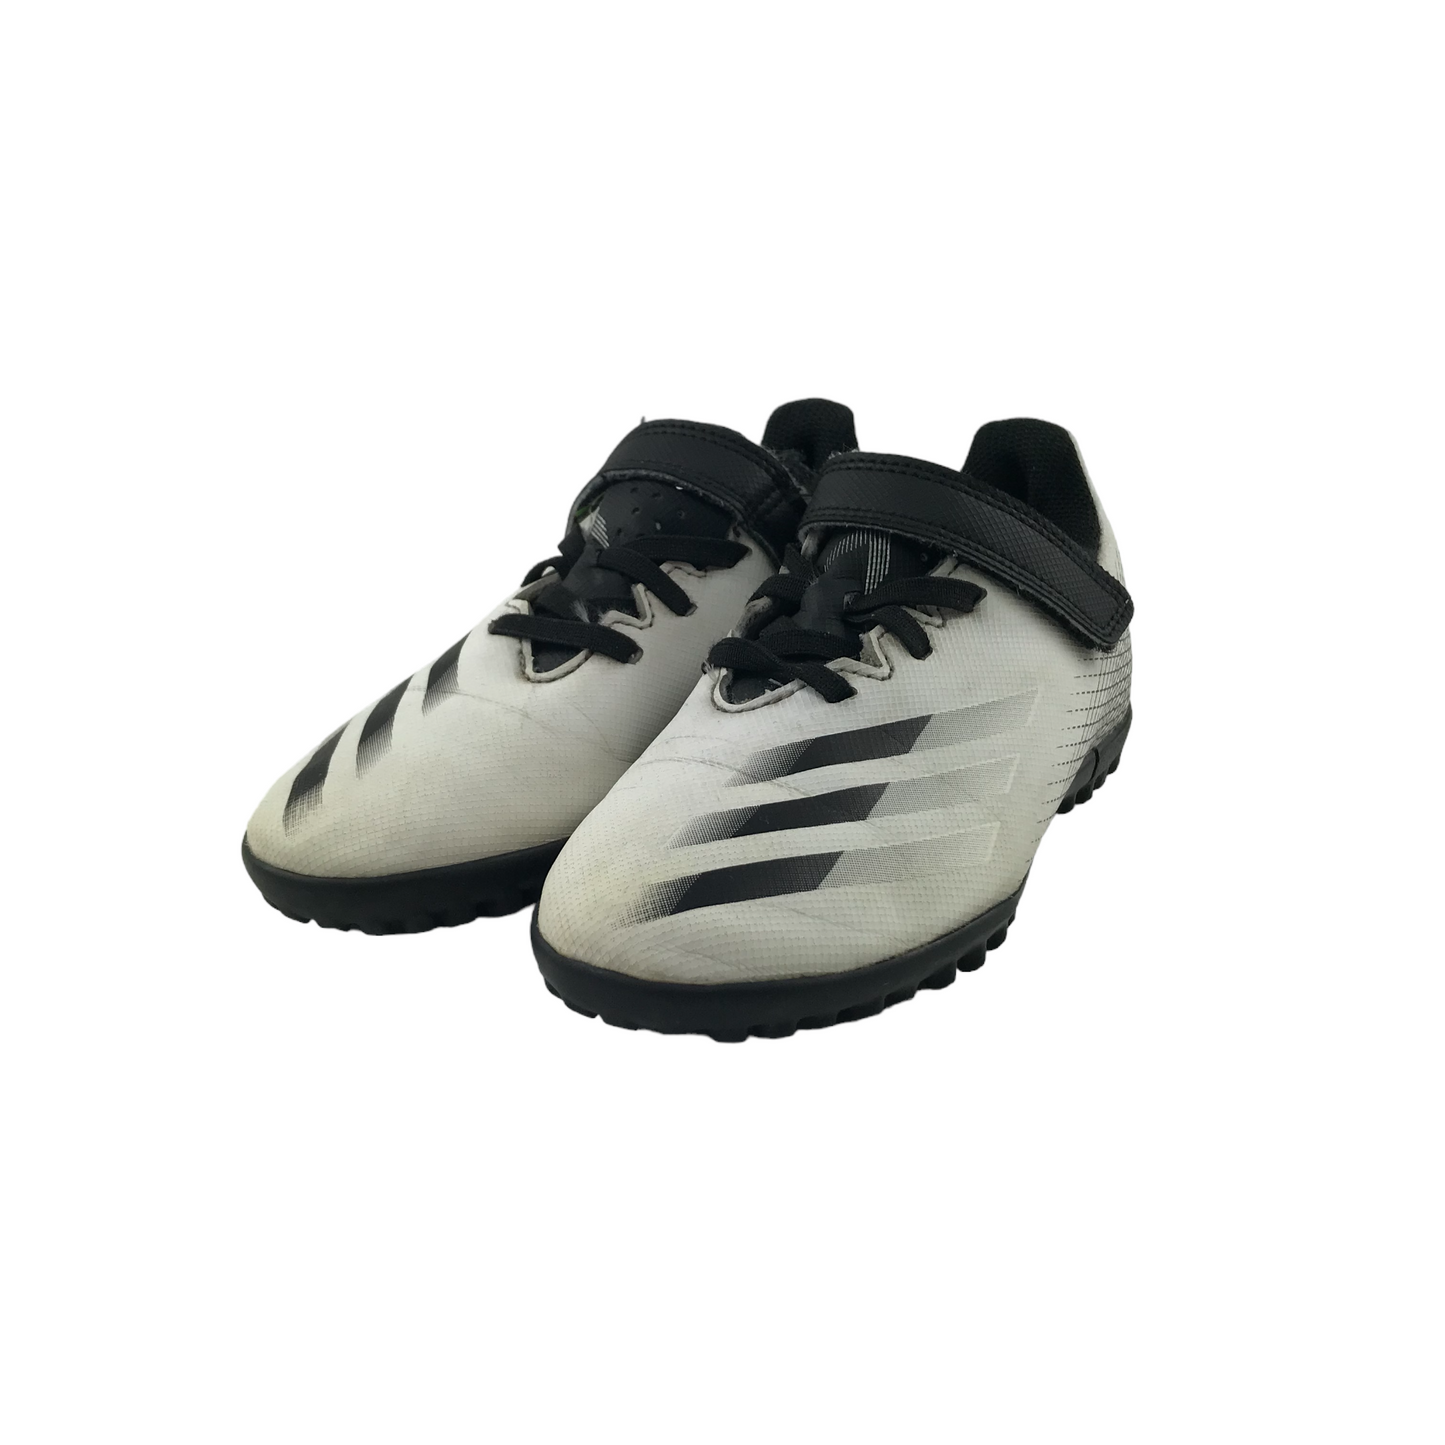 Adidas Football Boots Shoe Size 12 Junior Black and White Astroturf